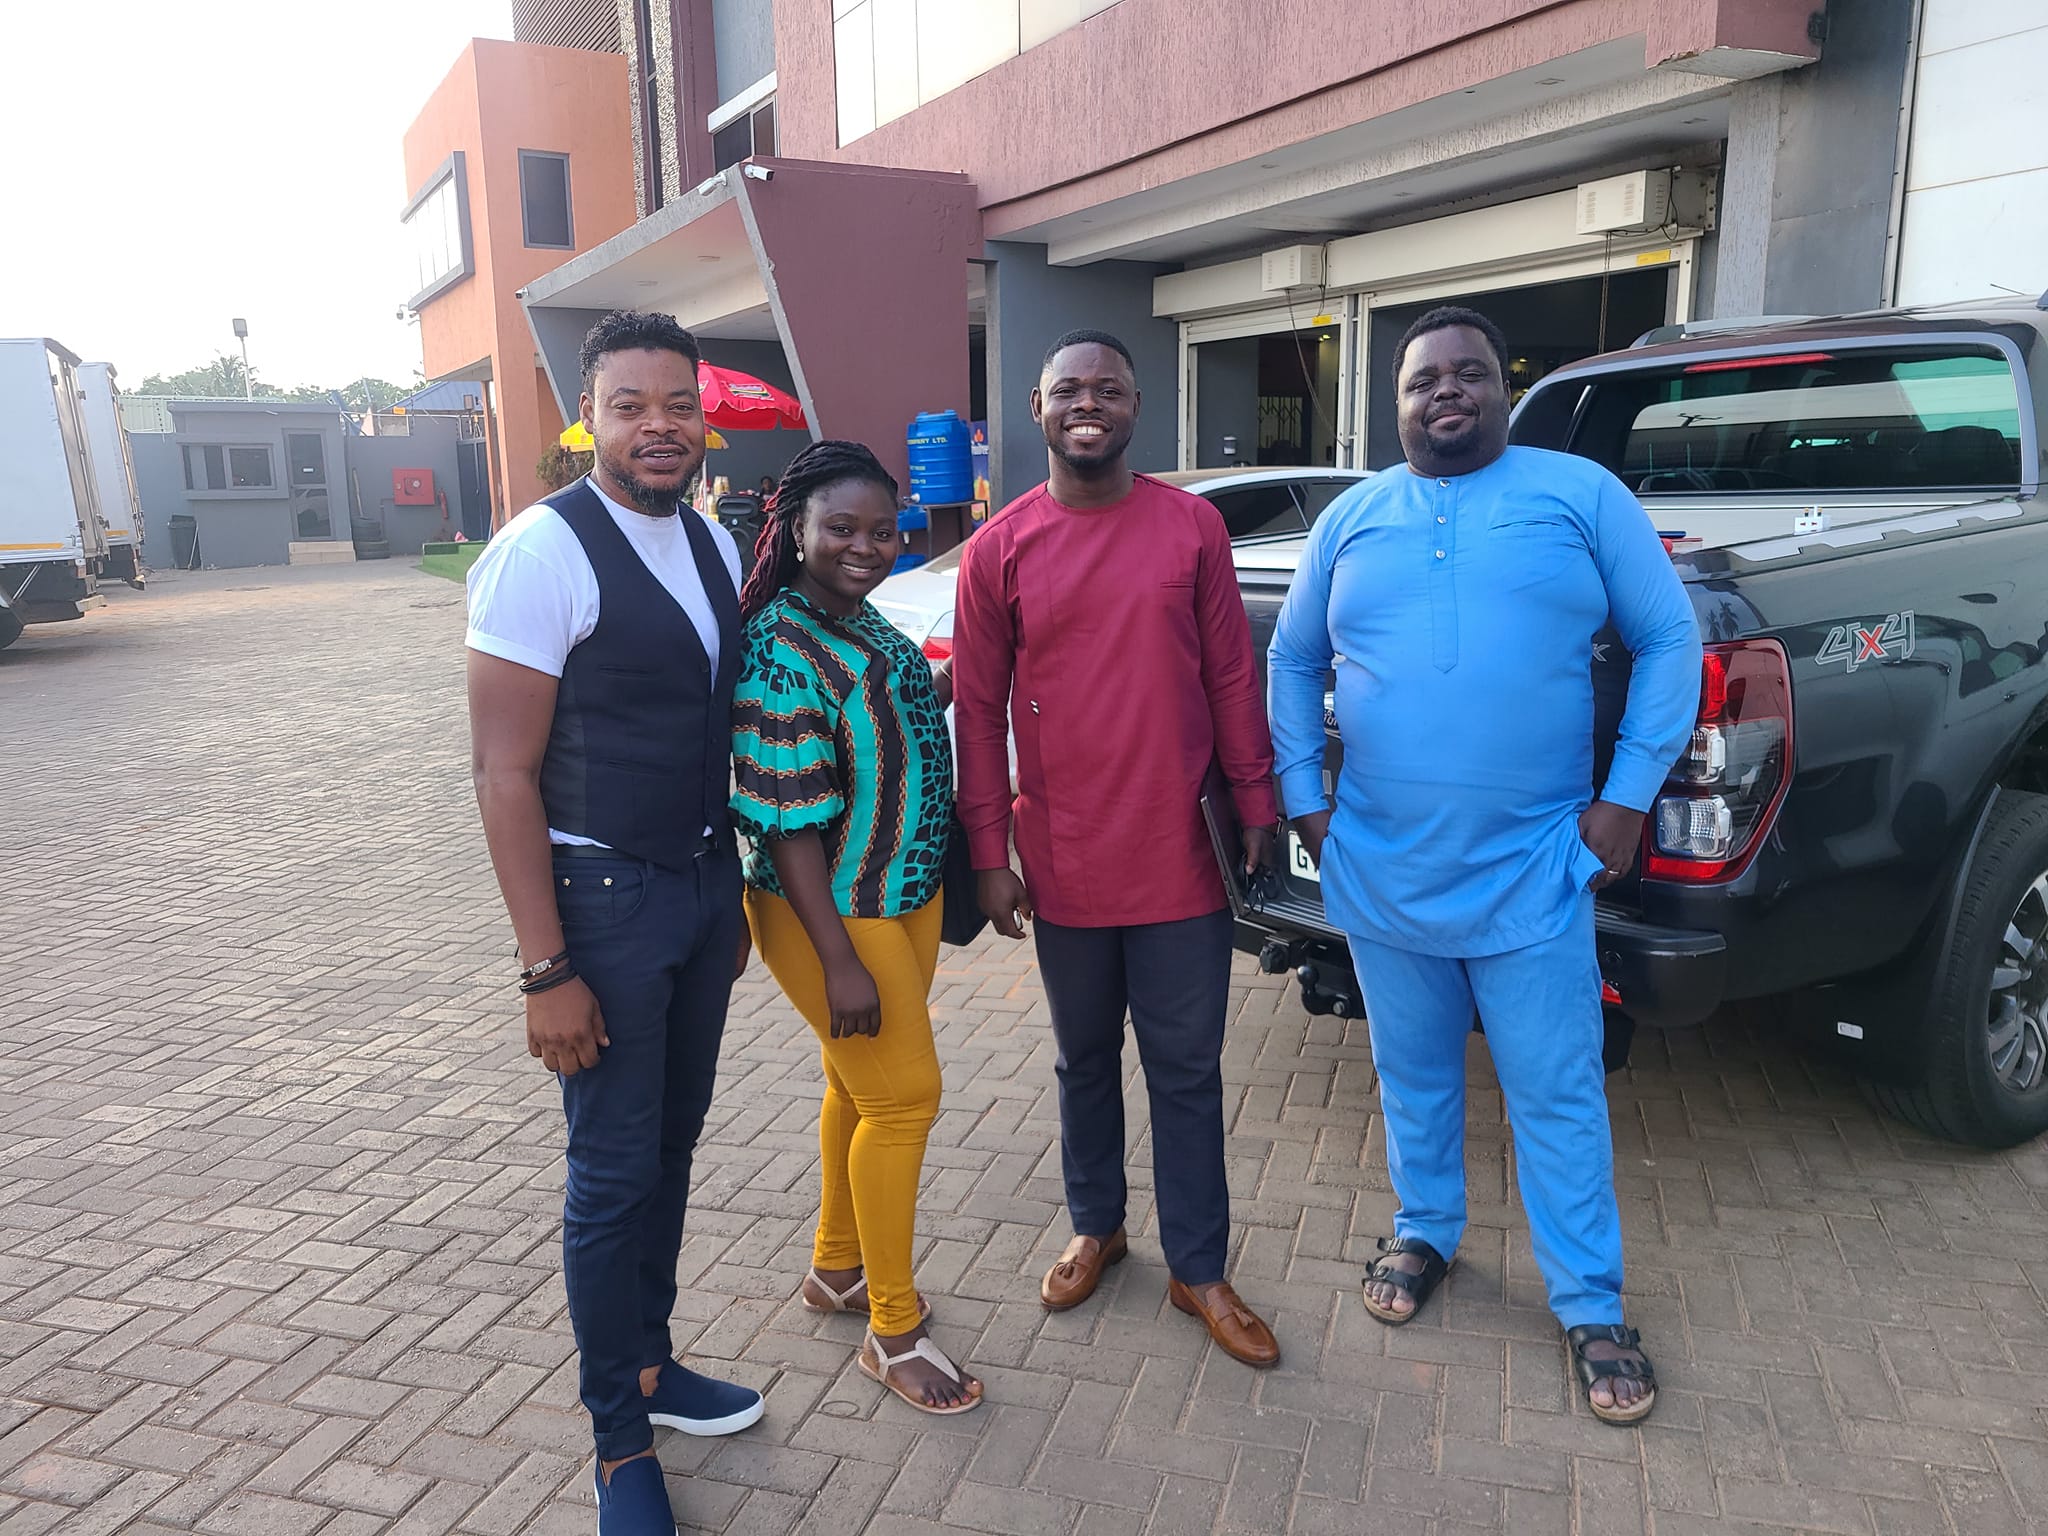 LESFAM TO HOST BEL "CHILL N WIN" PROMO DRAW 2 ON 15TH JUNE, 2022